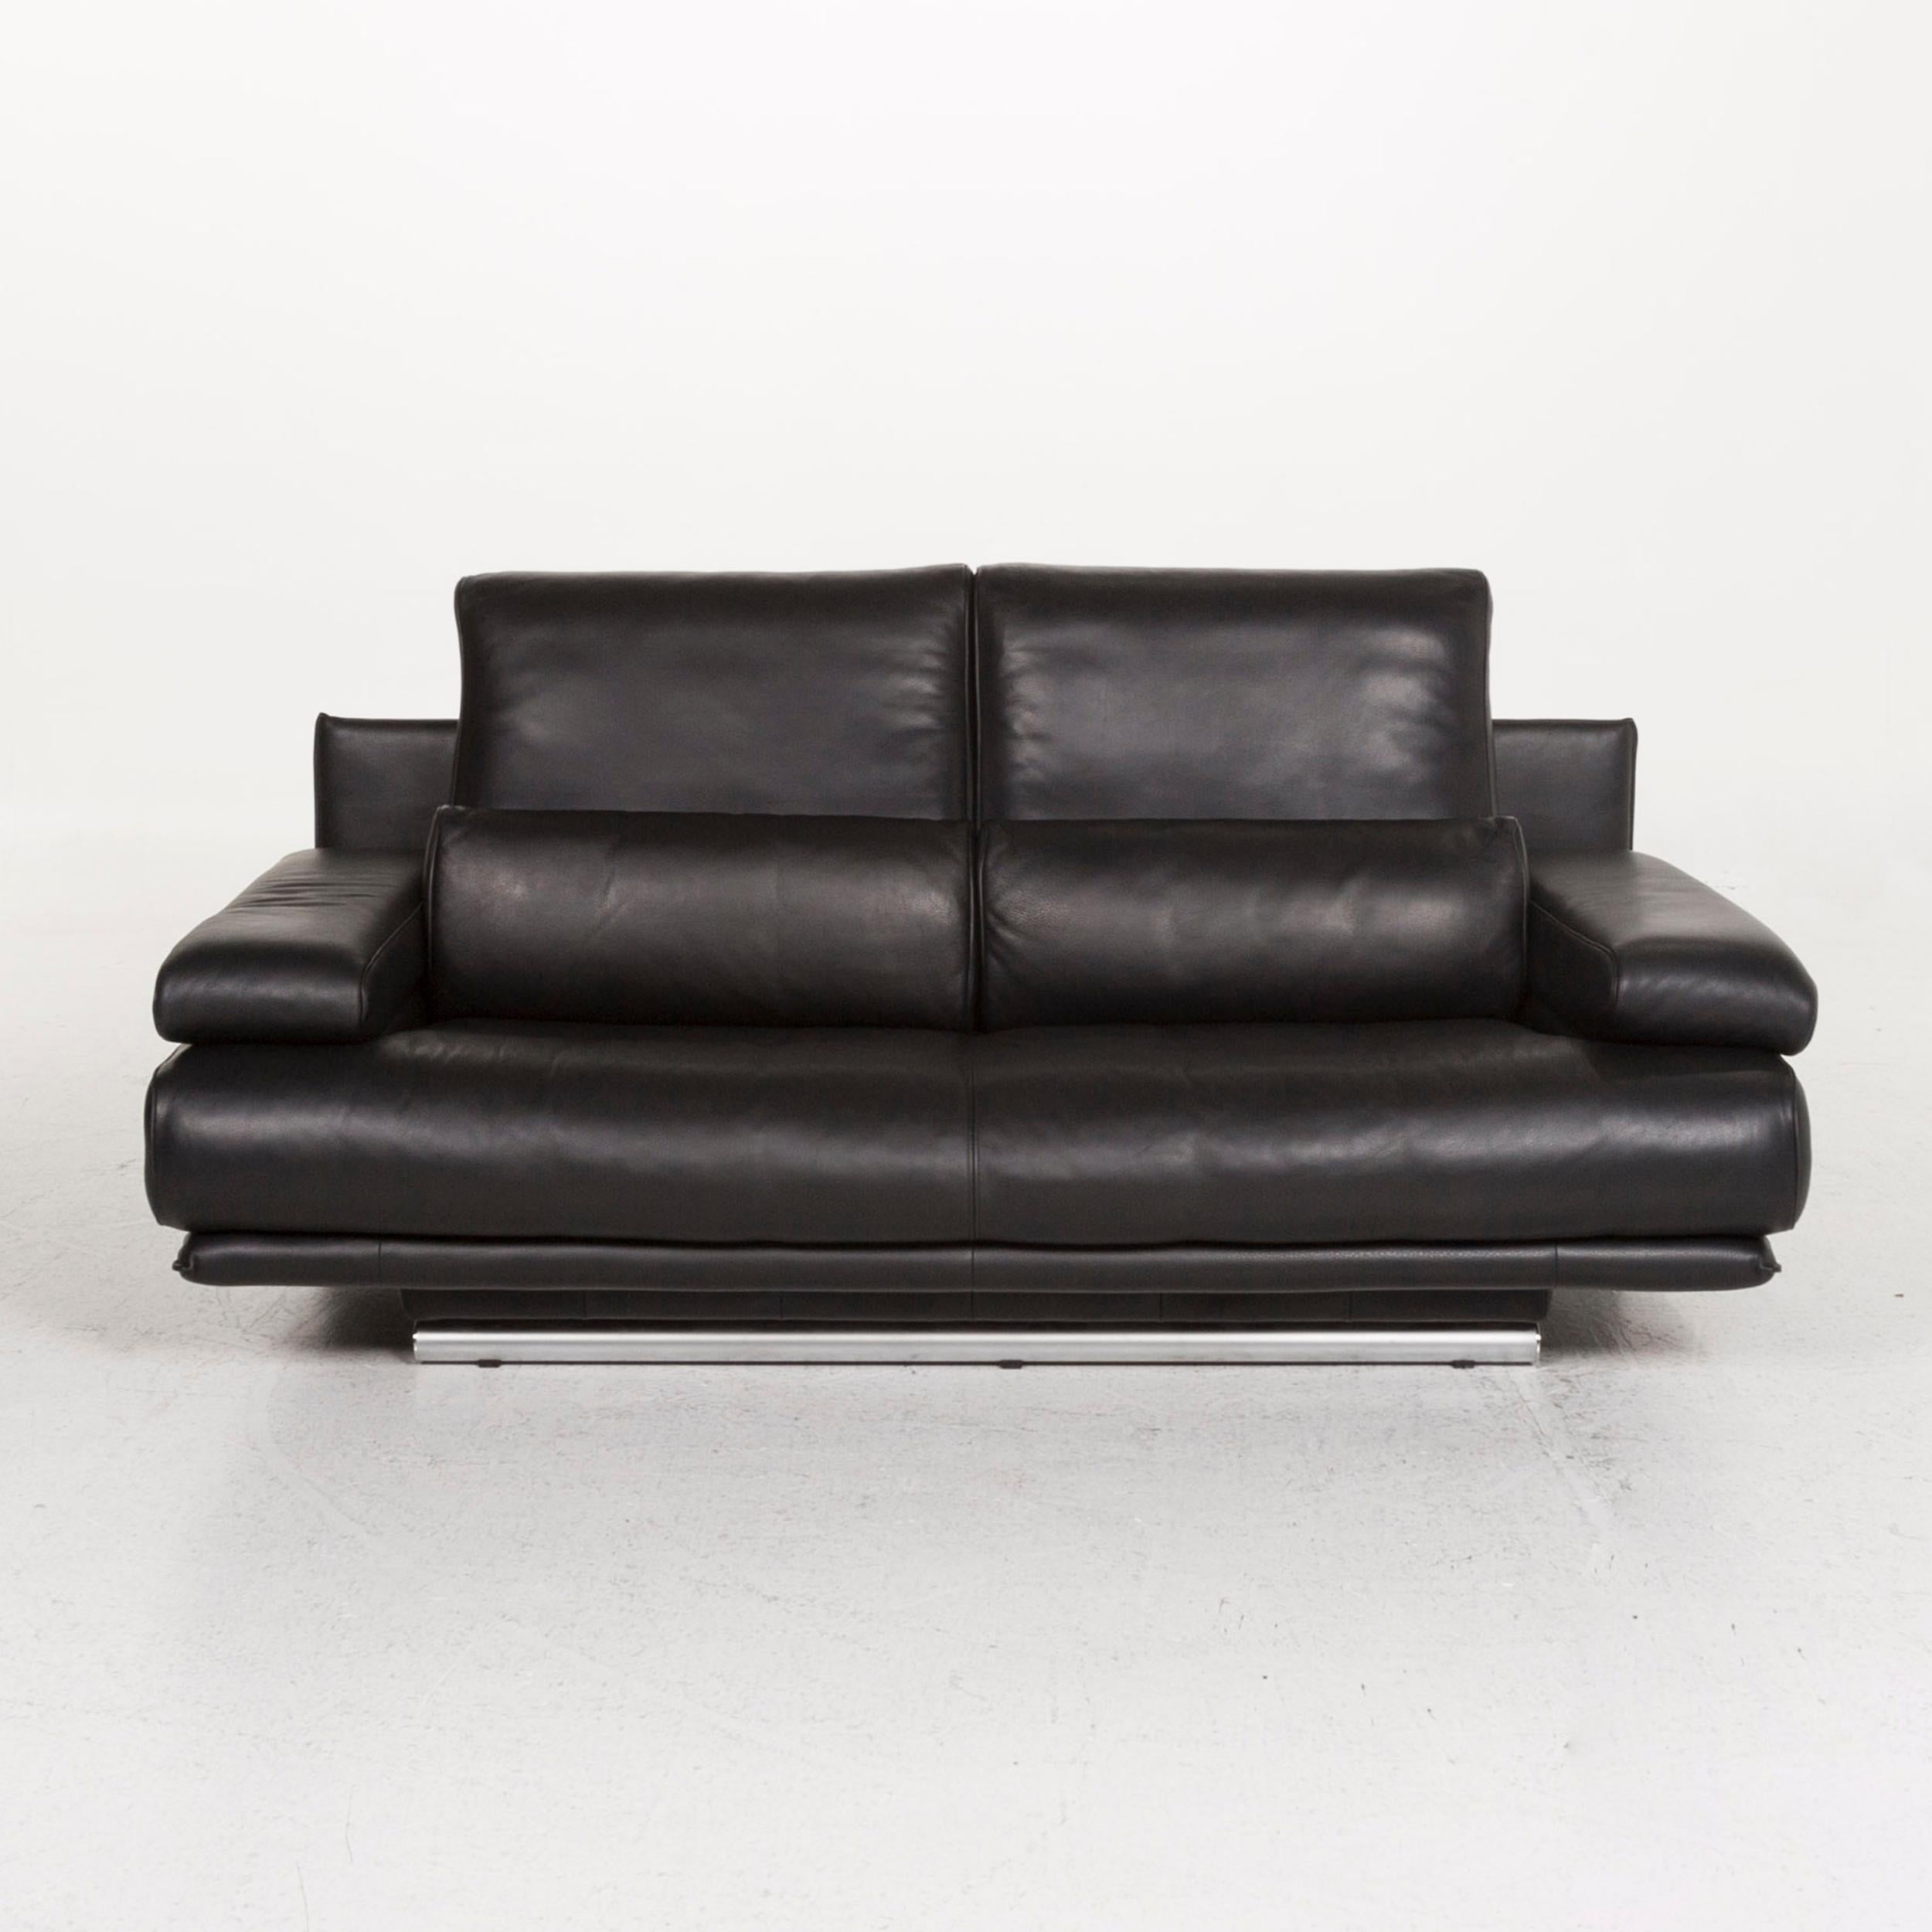 Modern Rolf Benz 6500 Leather Sofa Black Two-Seat Function Couch